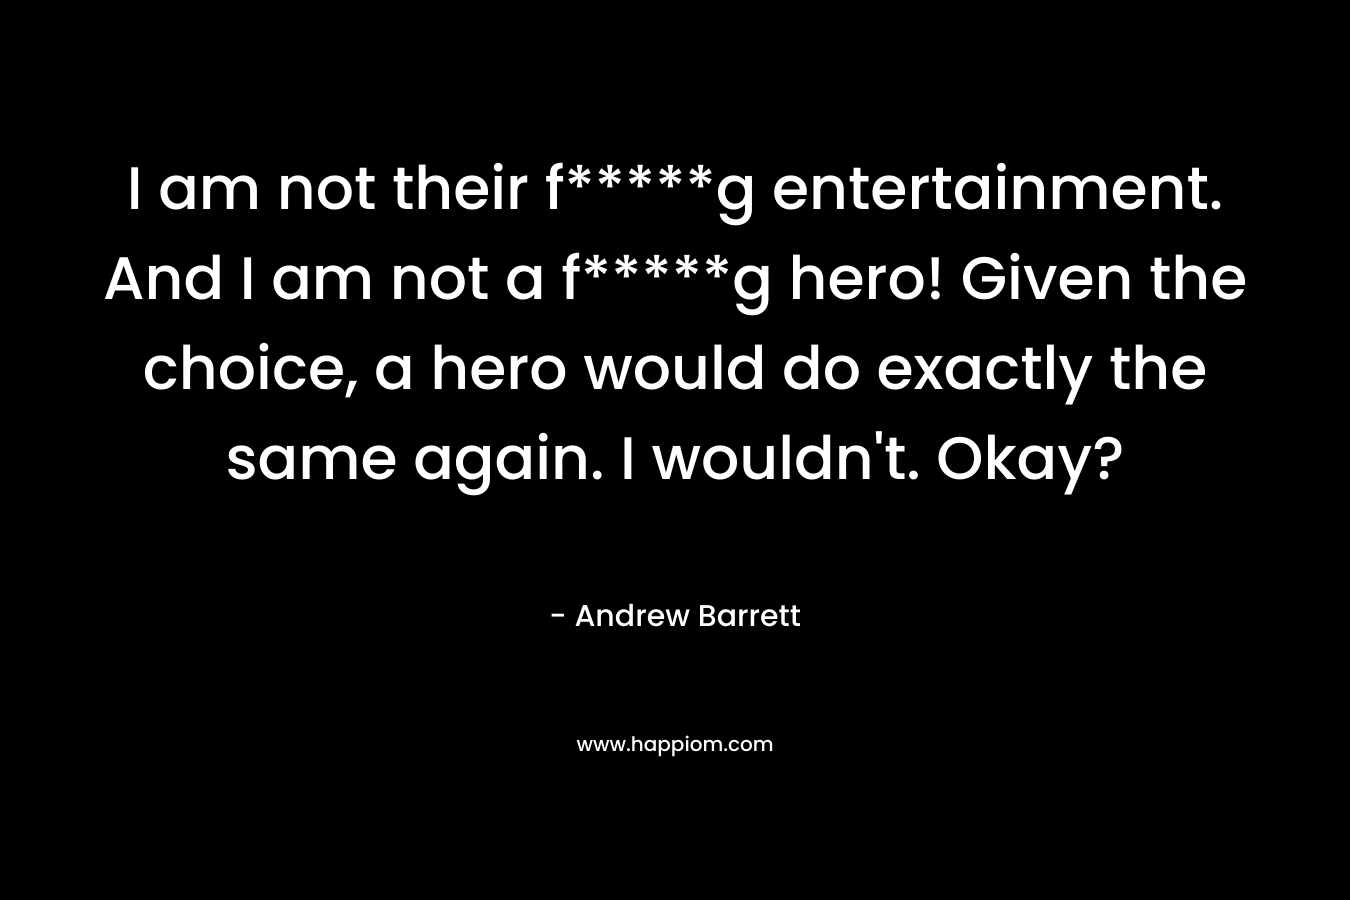 I am not their f*****g entertainment. And I am not a f*****g hero! Given the choice, a hero would do exactly the same again. I wouldn’t. Okay? – Andrew Barrett